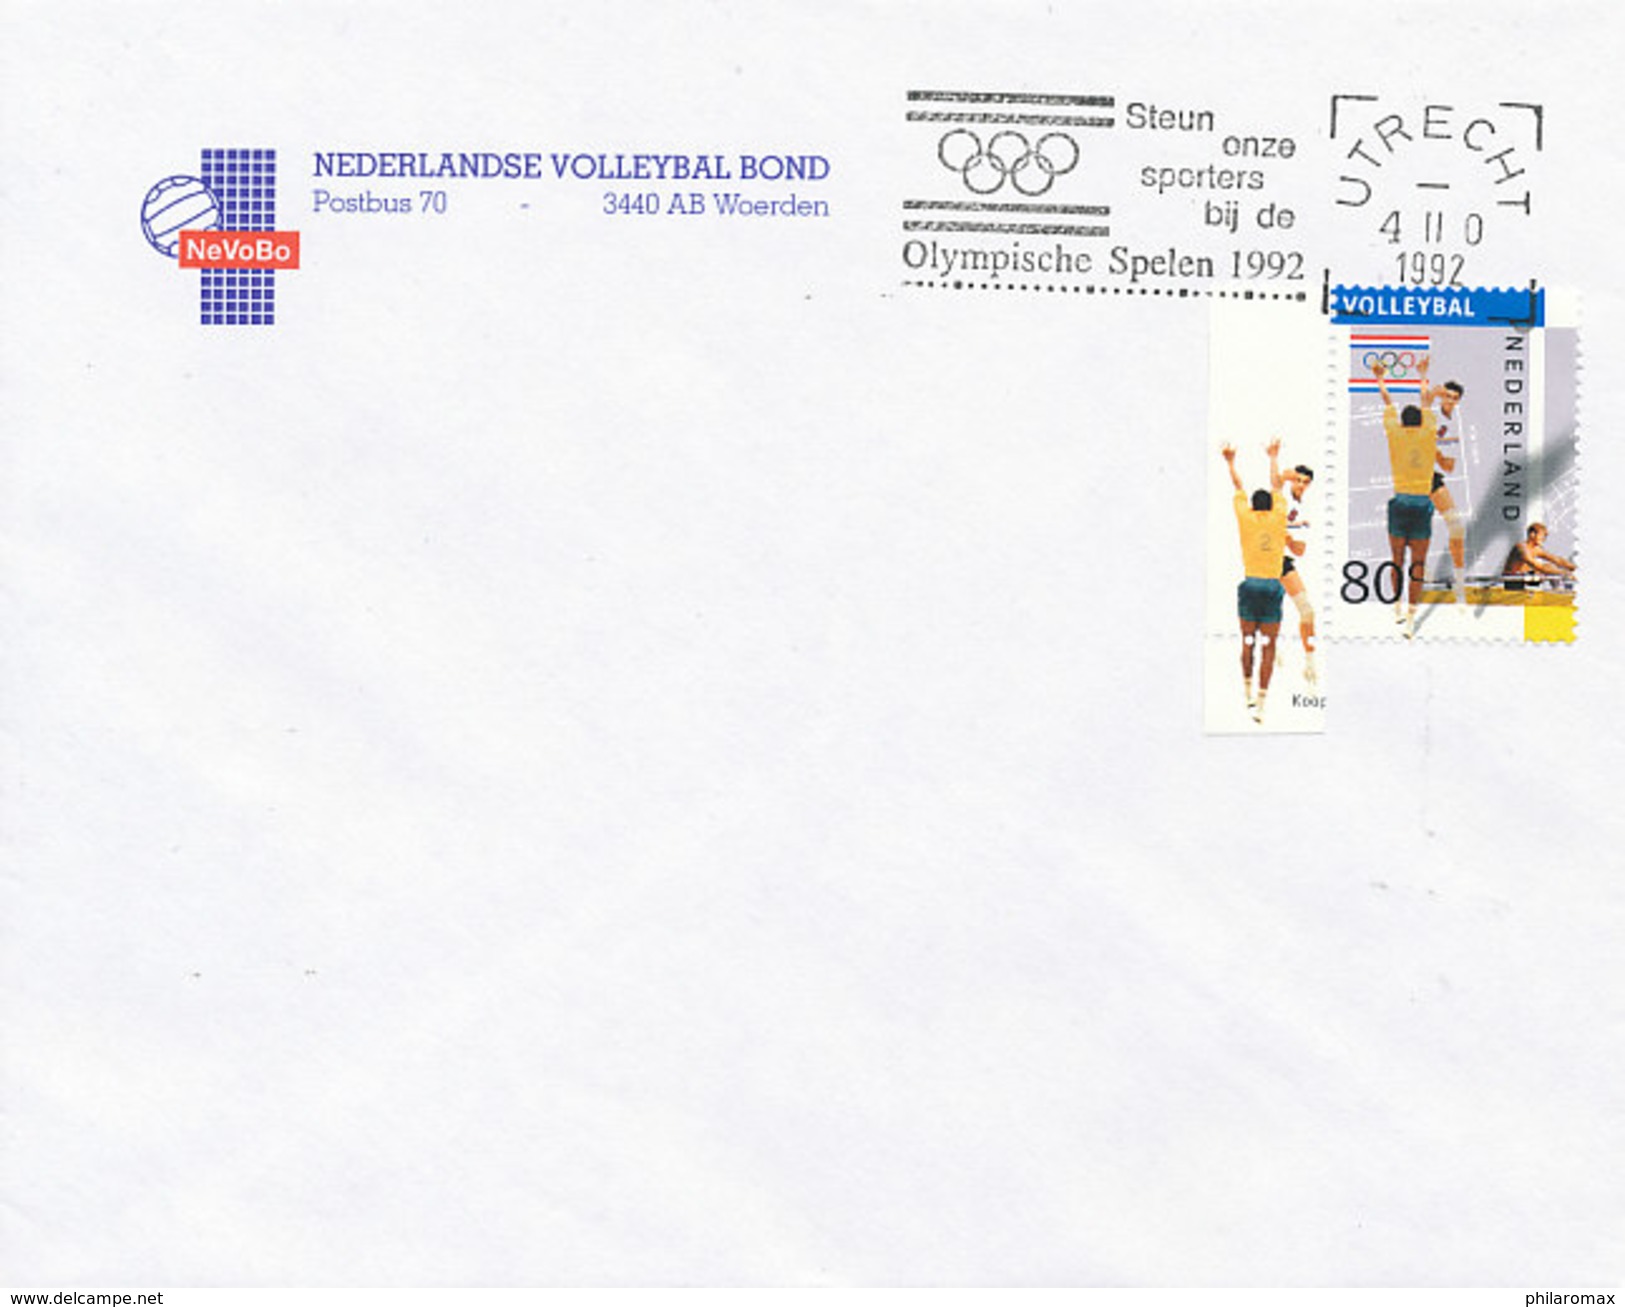 DC-0737 - 1992 NETHERLANDS - RR FDC VOLLEYBALL OLYMPICS - ORIGINAL COVER NEVOBO - VOLLEYBALL ORGANIZATION - Volleyball